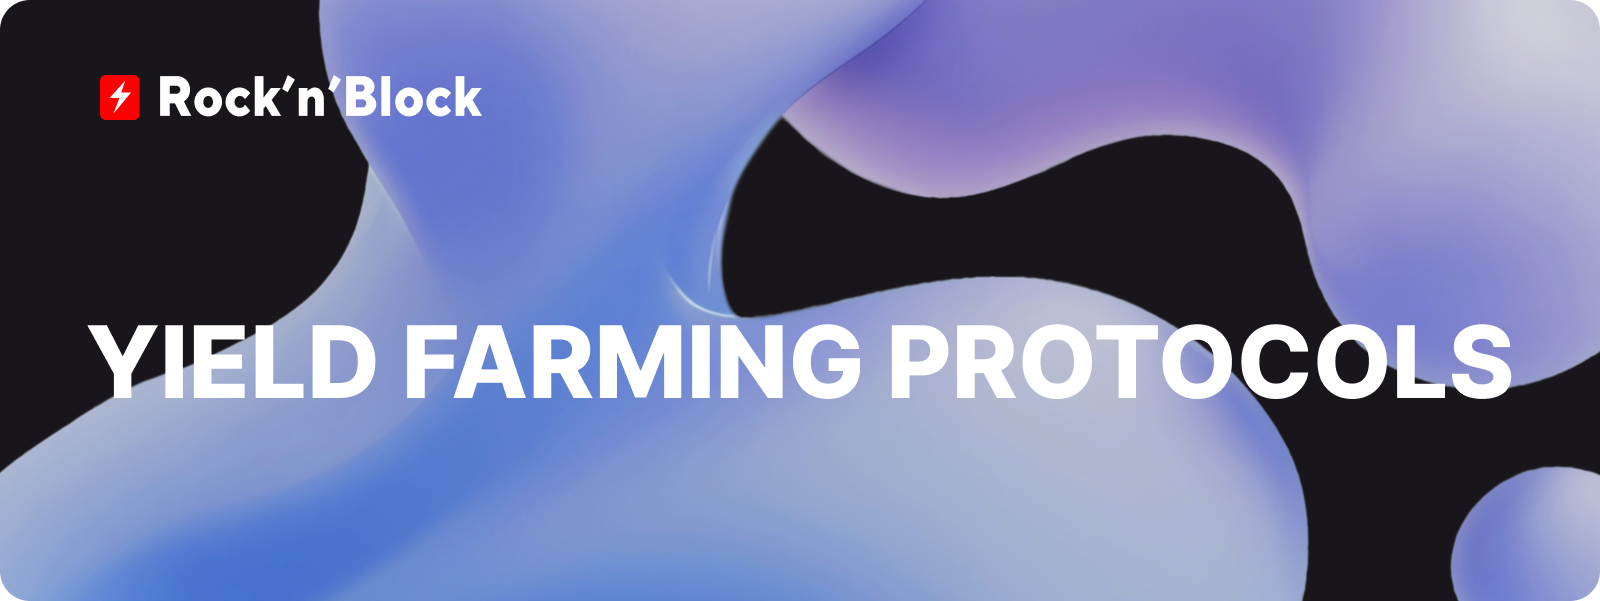 Yield farming protocols, a cornerstone of DeFi, offer users the opportunity to earn rewards by providing liquidity to decentralized protocols. These platforms harness blockchain technology and smart contracts to automate the process, enabling users to optimize their crypto assets' potential returns.